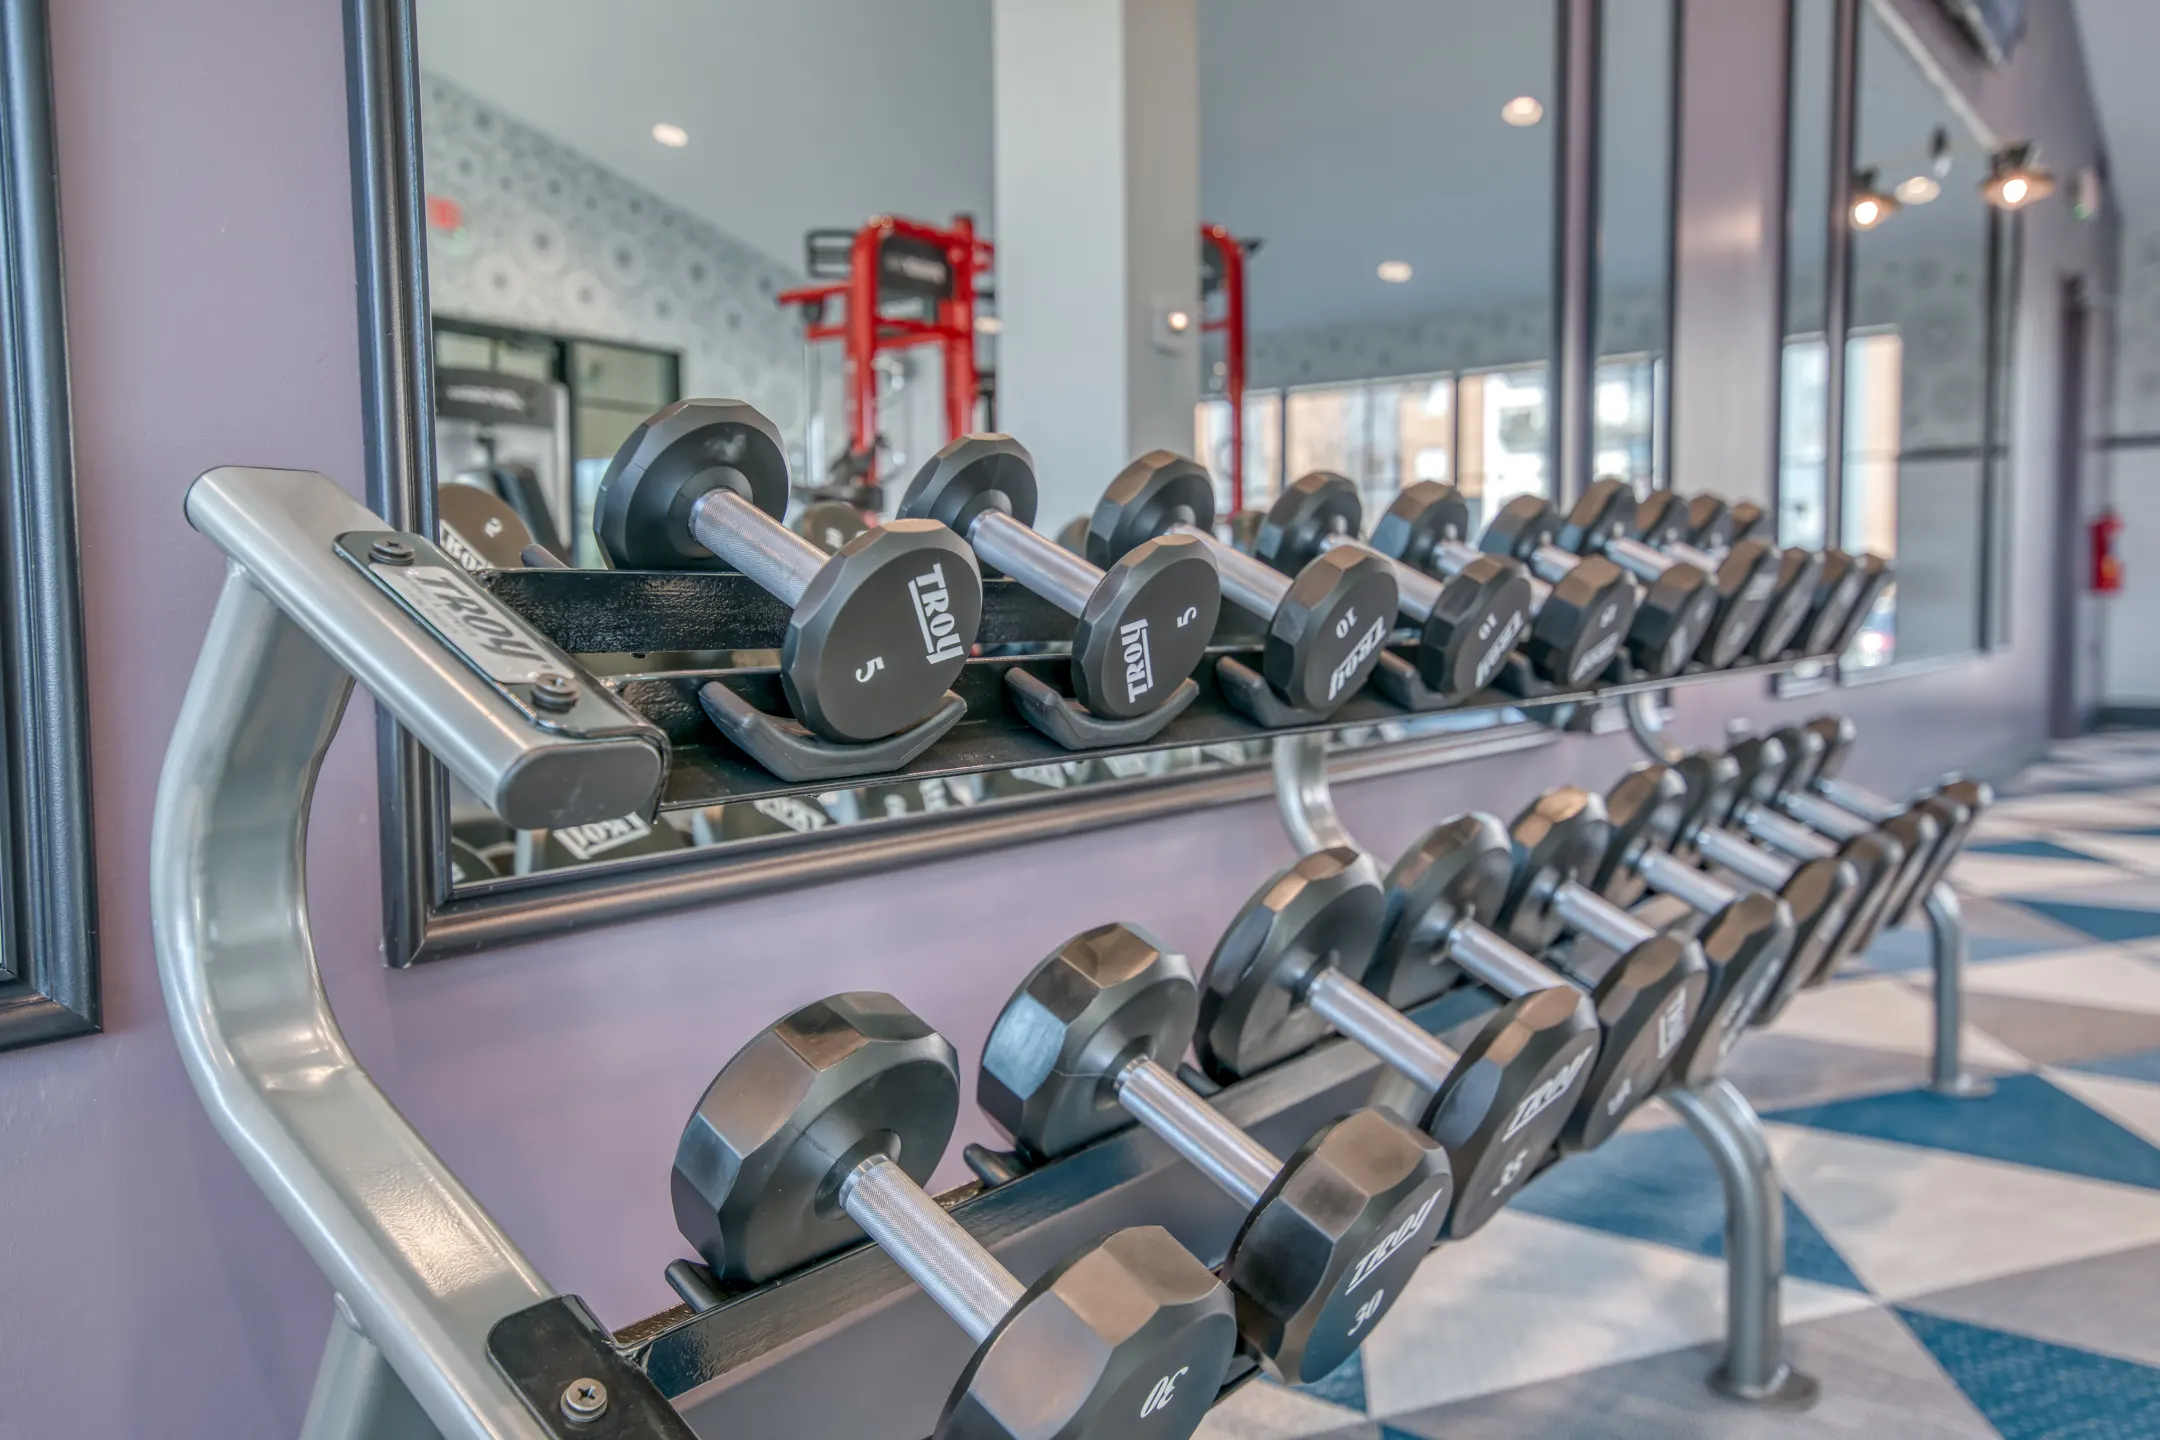 Fitness Weight Room - Residences at Lakeside - Lombard, IL